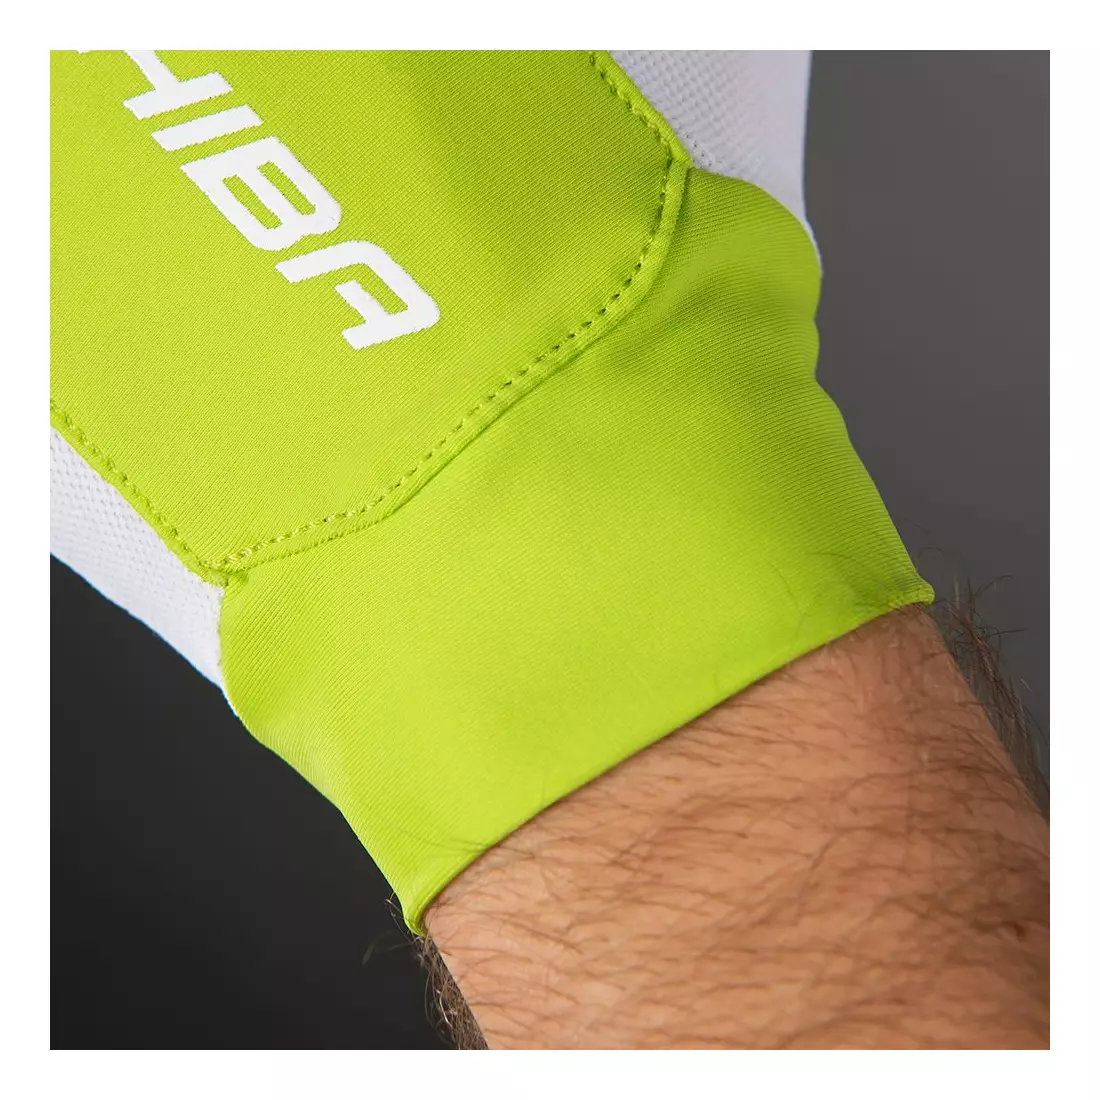 CHIBA MISTRAL road cycling gloves, green 3030420